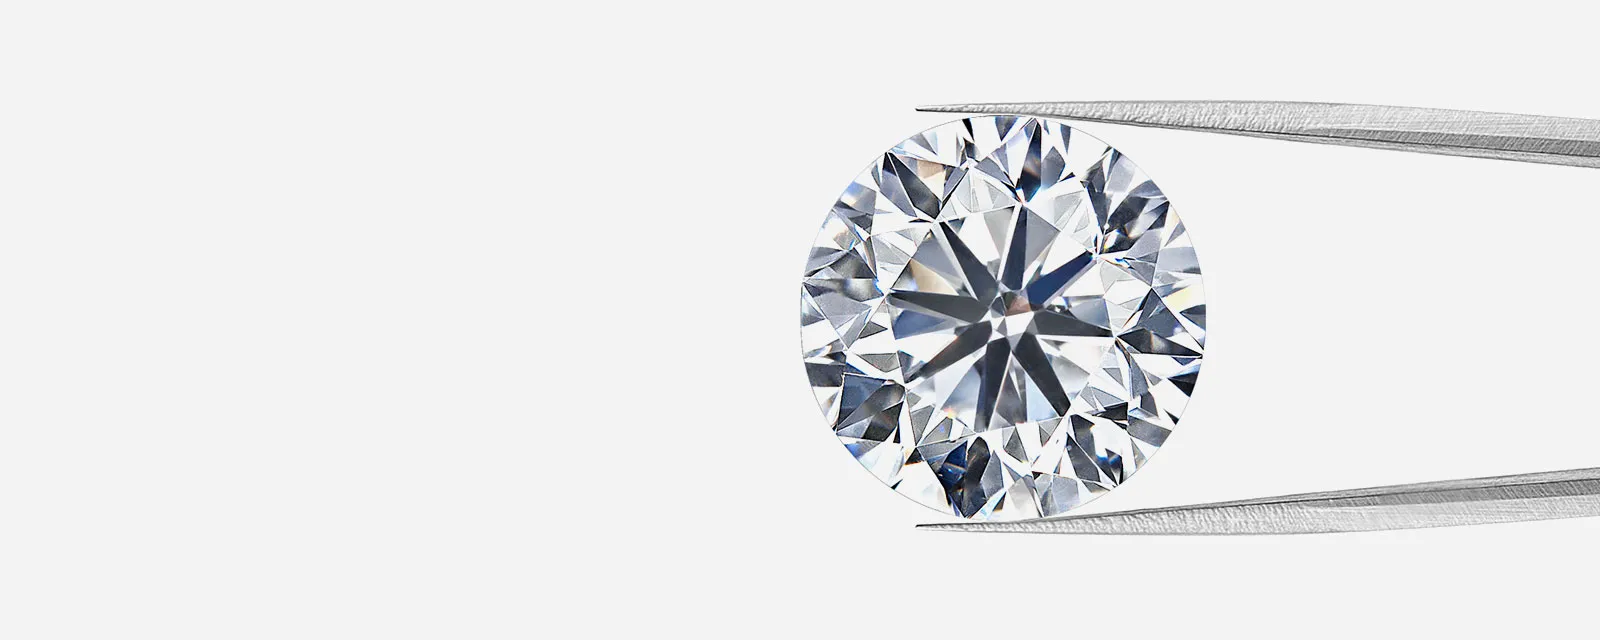 Find Your Perfect Diamond Browse our extensive selection of natural and lab-grown diamonds. The Jewelry Source El Segundo, CA